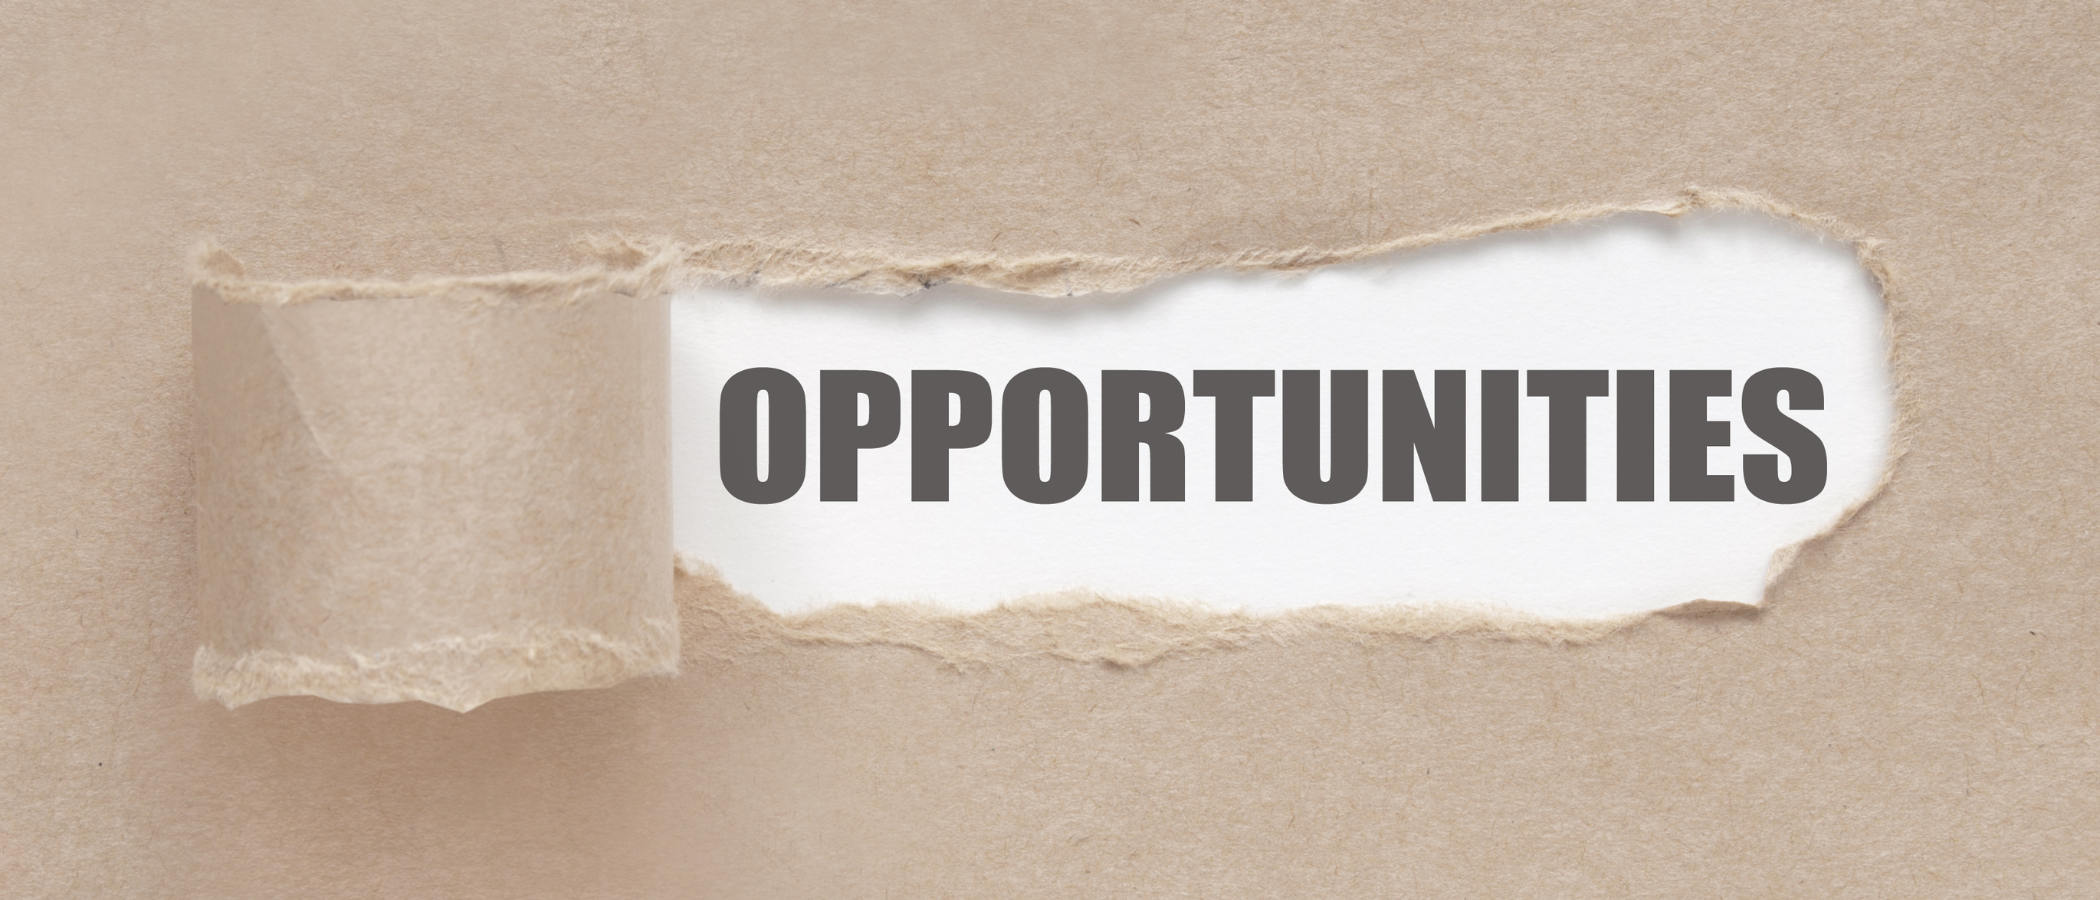 a piece of paper ripped to reveal the word 'opportunities'